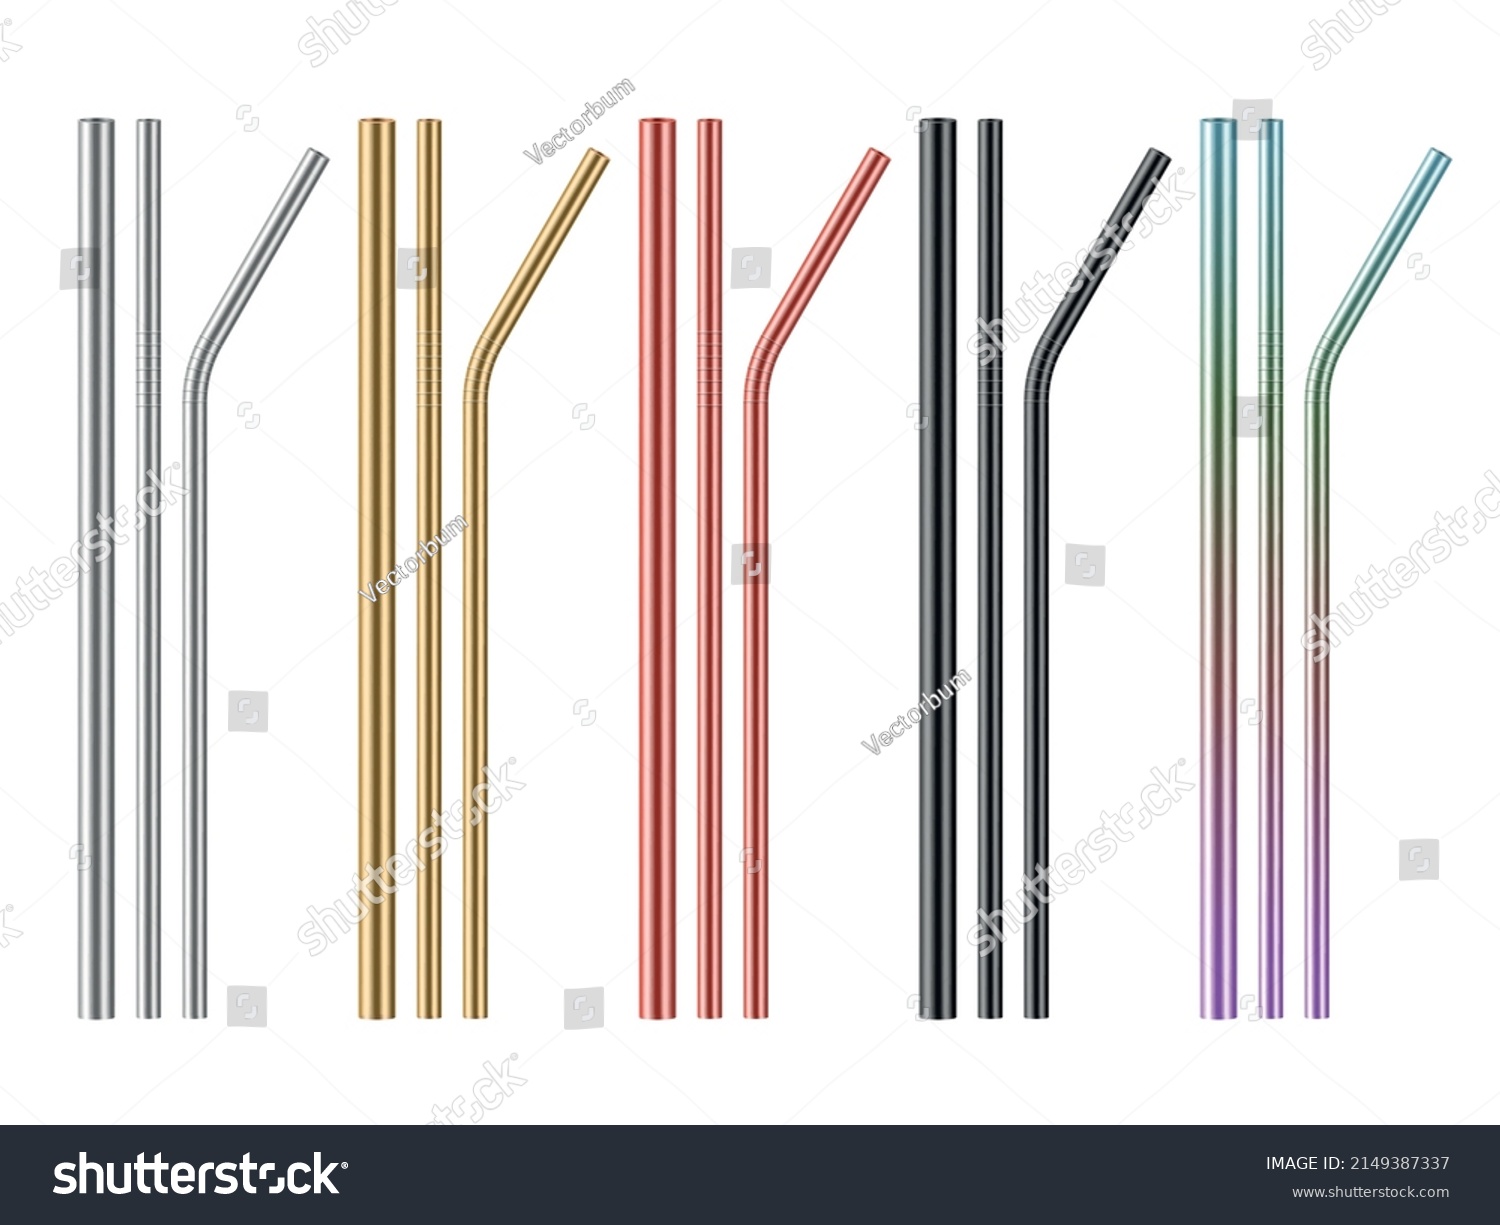 SVG of Realistic metal drinking straws. Different colors steel zero waste pipes for beverage. Straight and curved cocktail sticks. Alternative eco product. Vector reusable bar svg